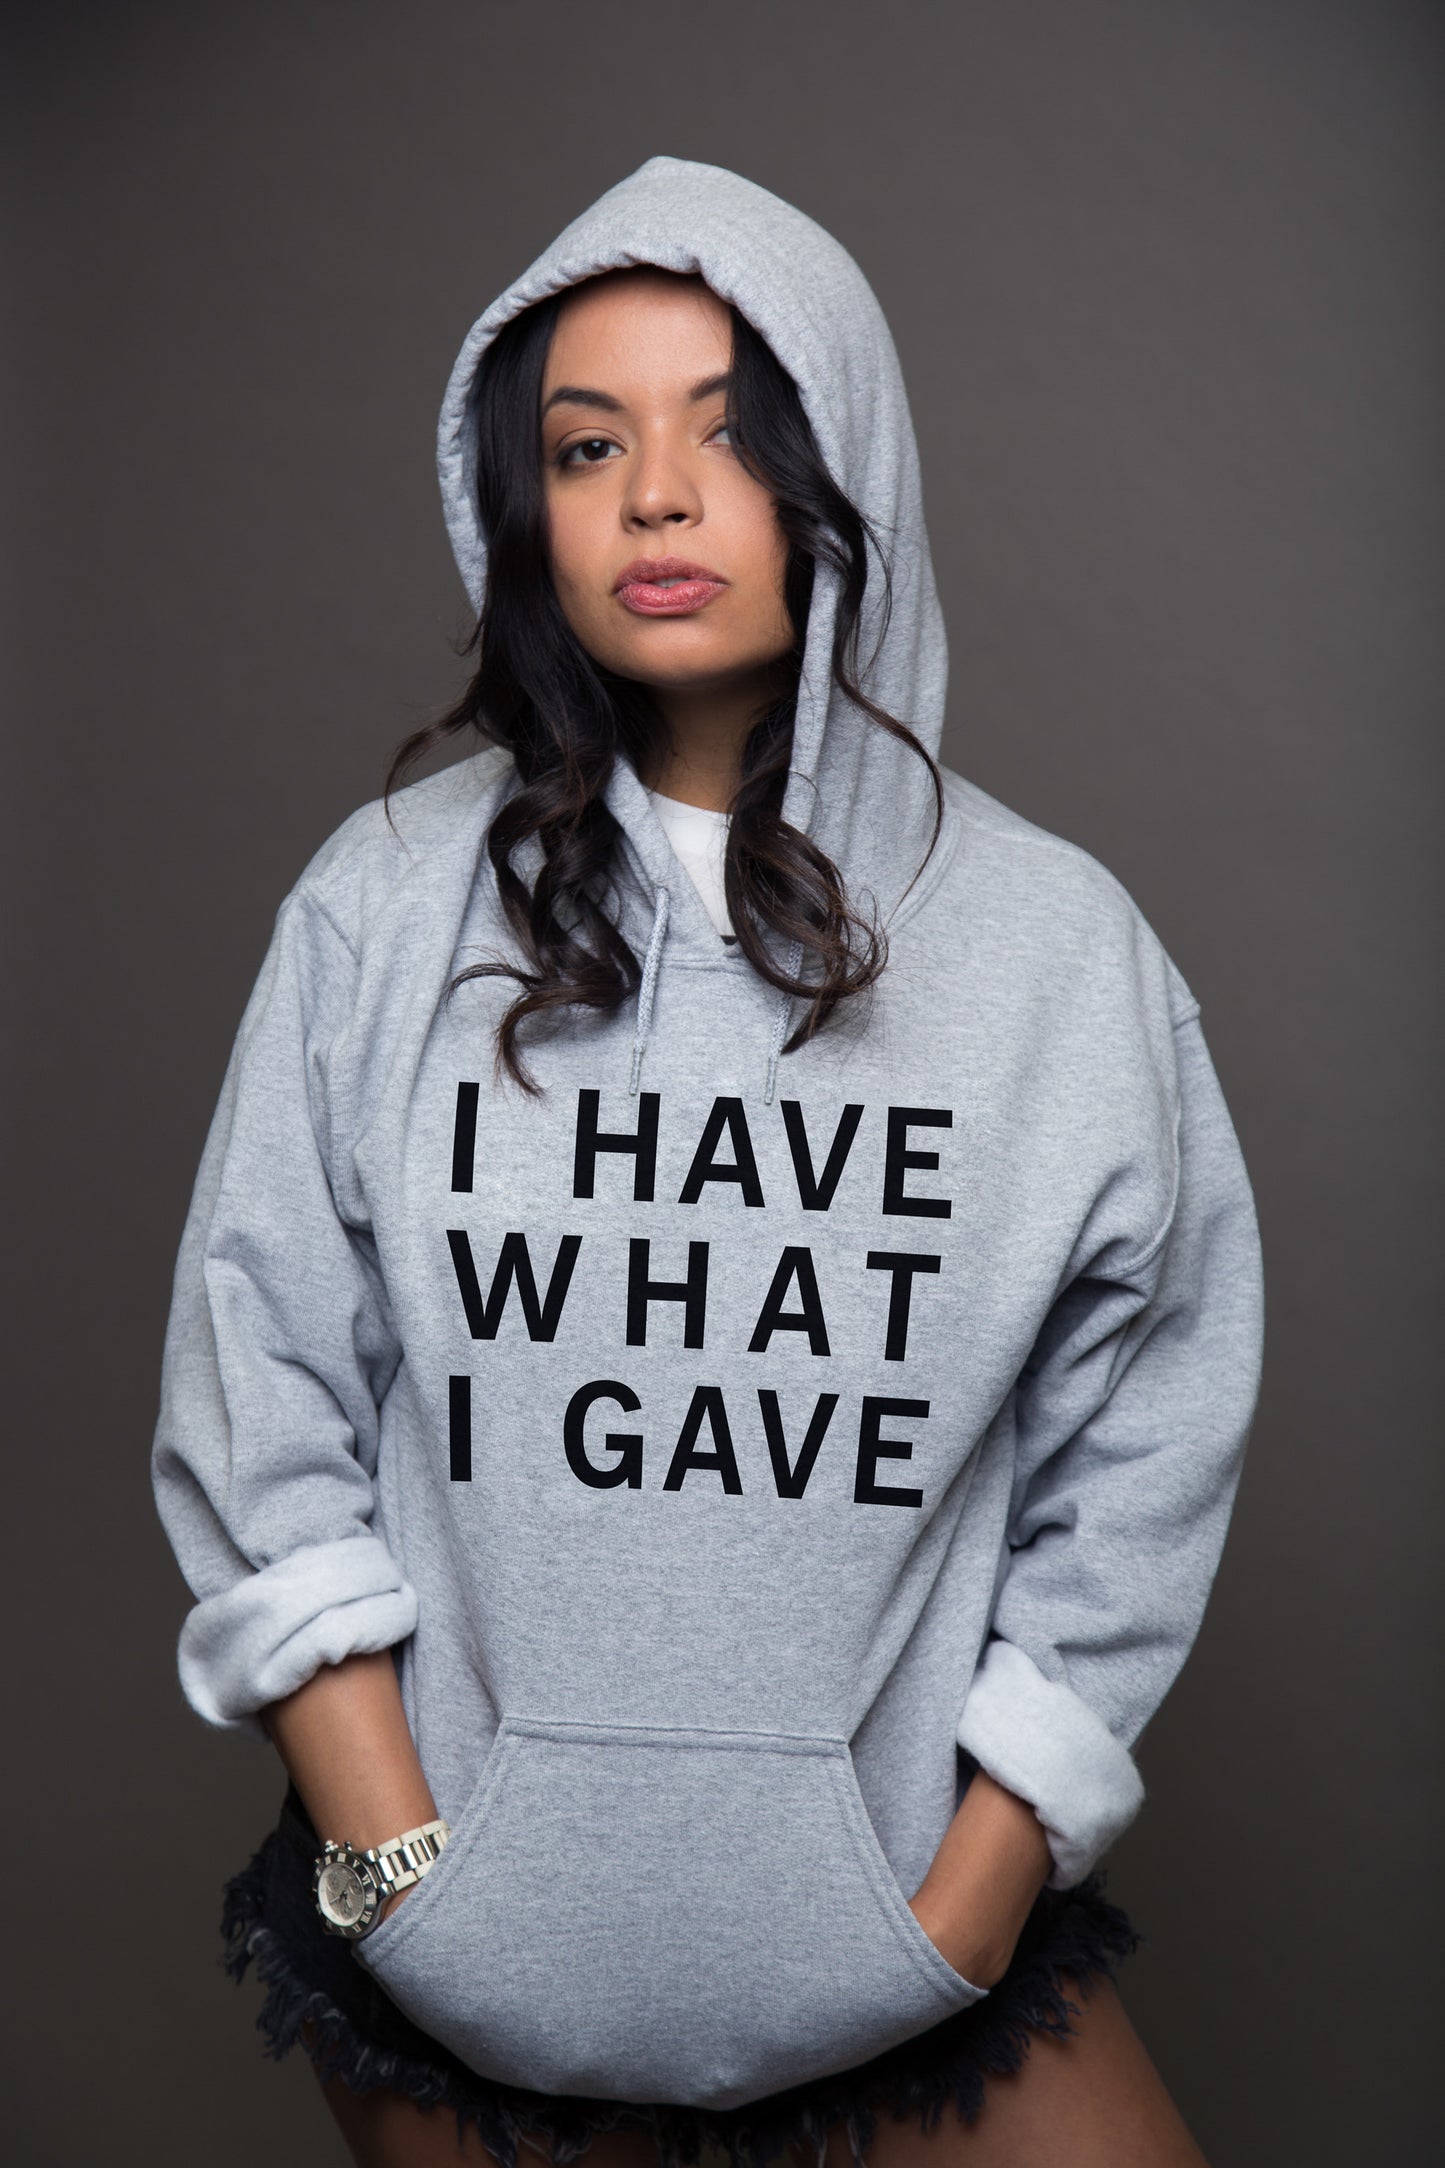 I Have What I Gave Hoodie Grey, Grey I Have What I Gave Hoodie, I Have What I Gave Hoodie , Sasha I Have, Sasha Grey I Have, Sasha Grey I Have What I Gave, Sasha Grey Collection, Sasha Grey Hoodie